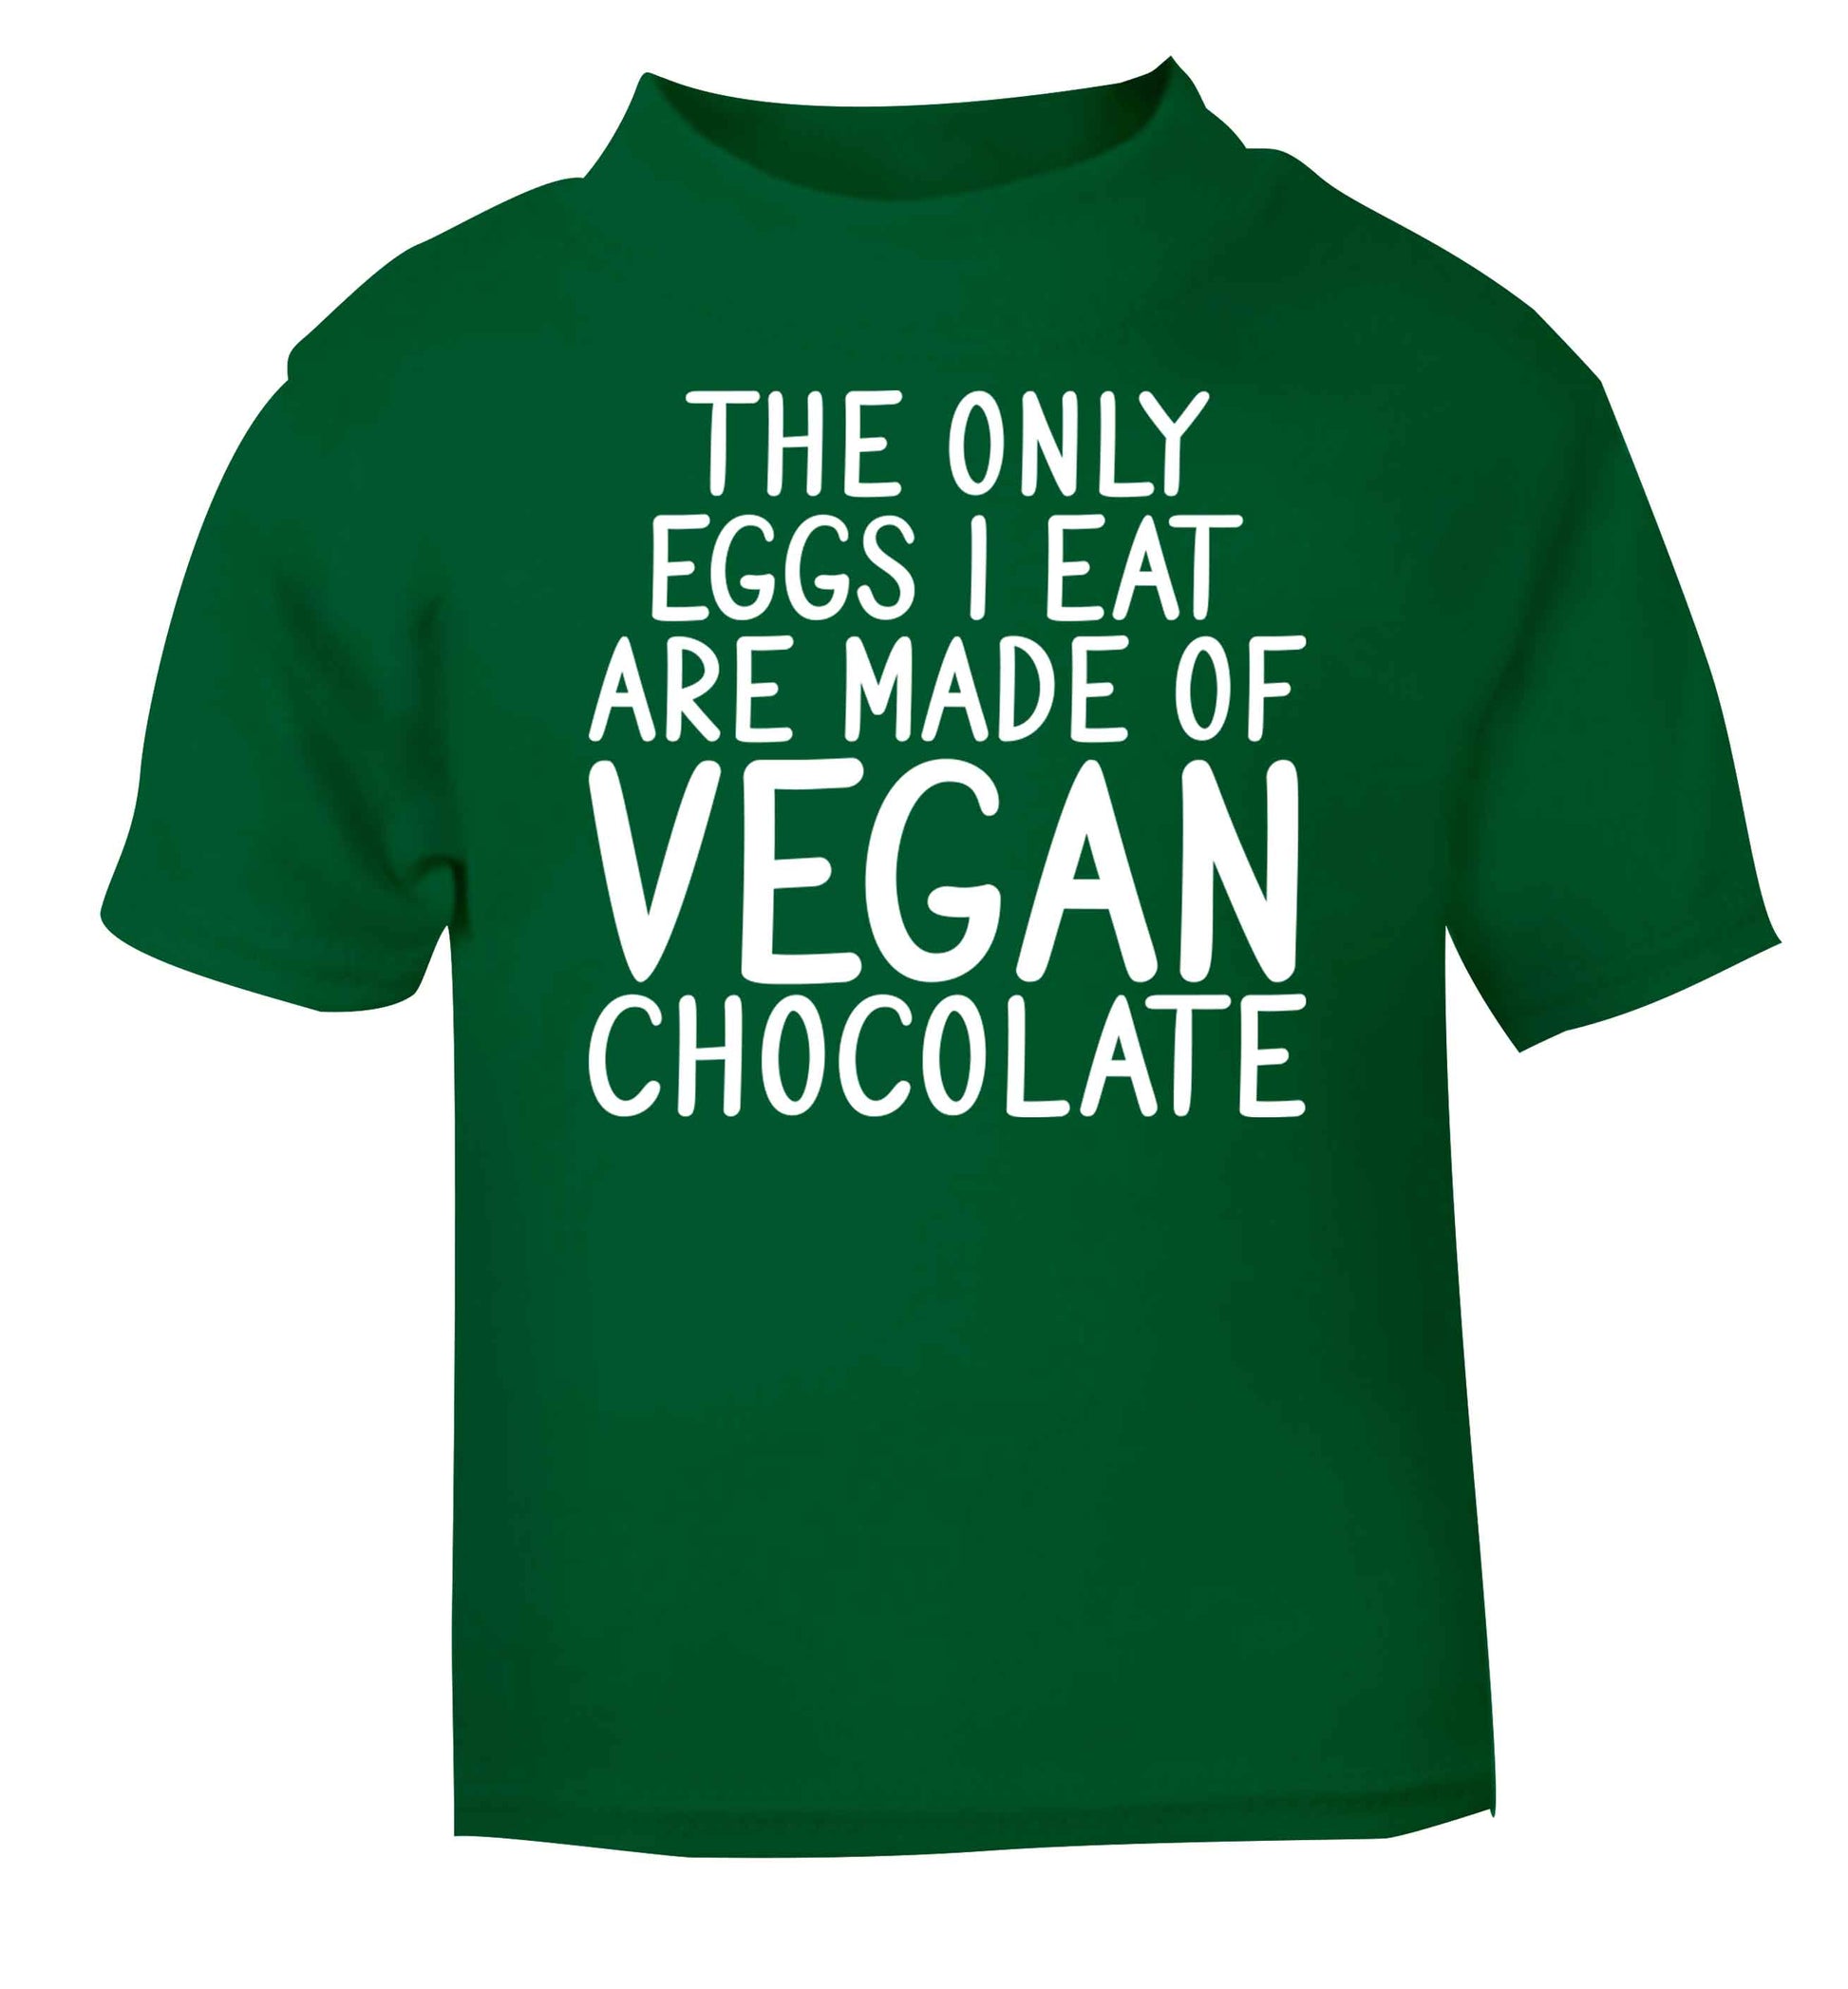 The only eggs I eat are made of vegan chocolate green baby toddler Tshirt 2 Years